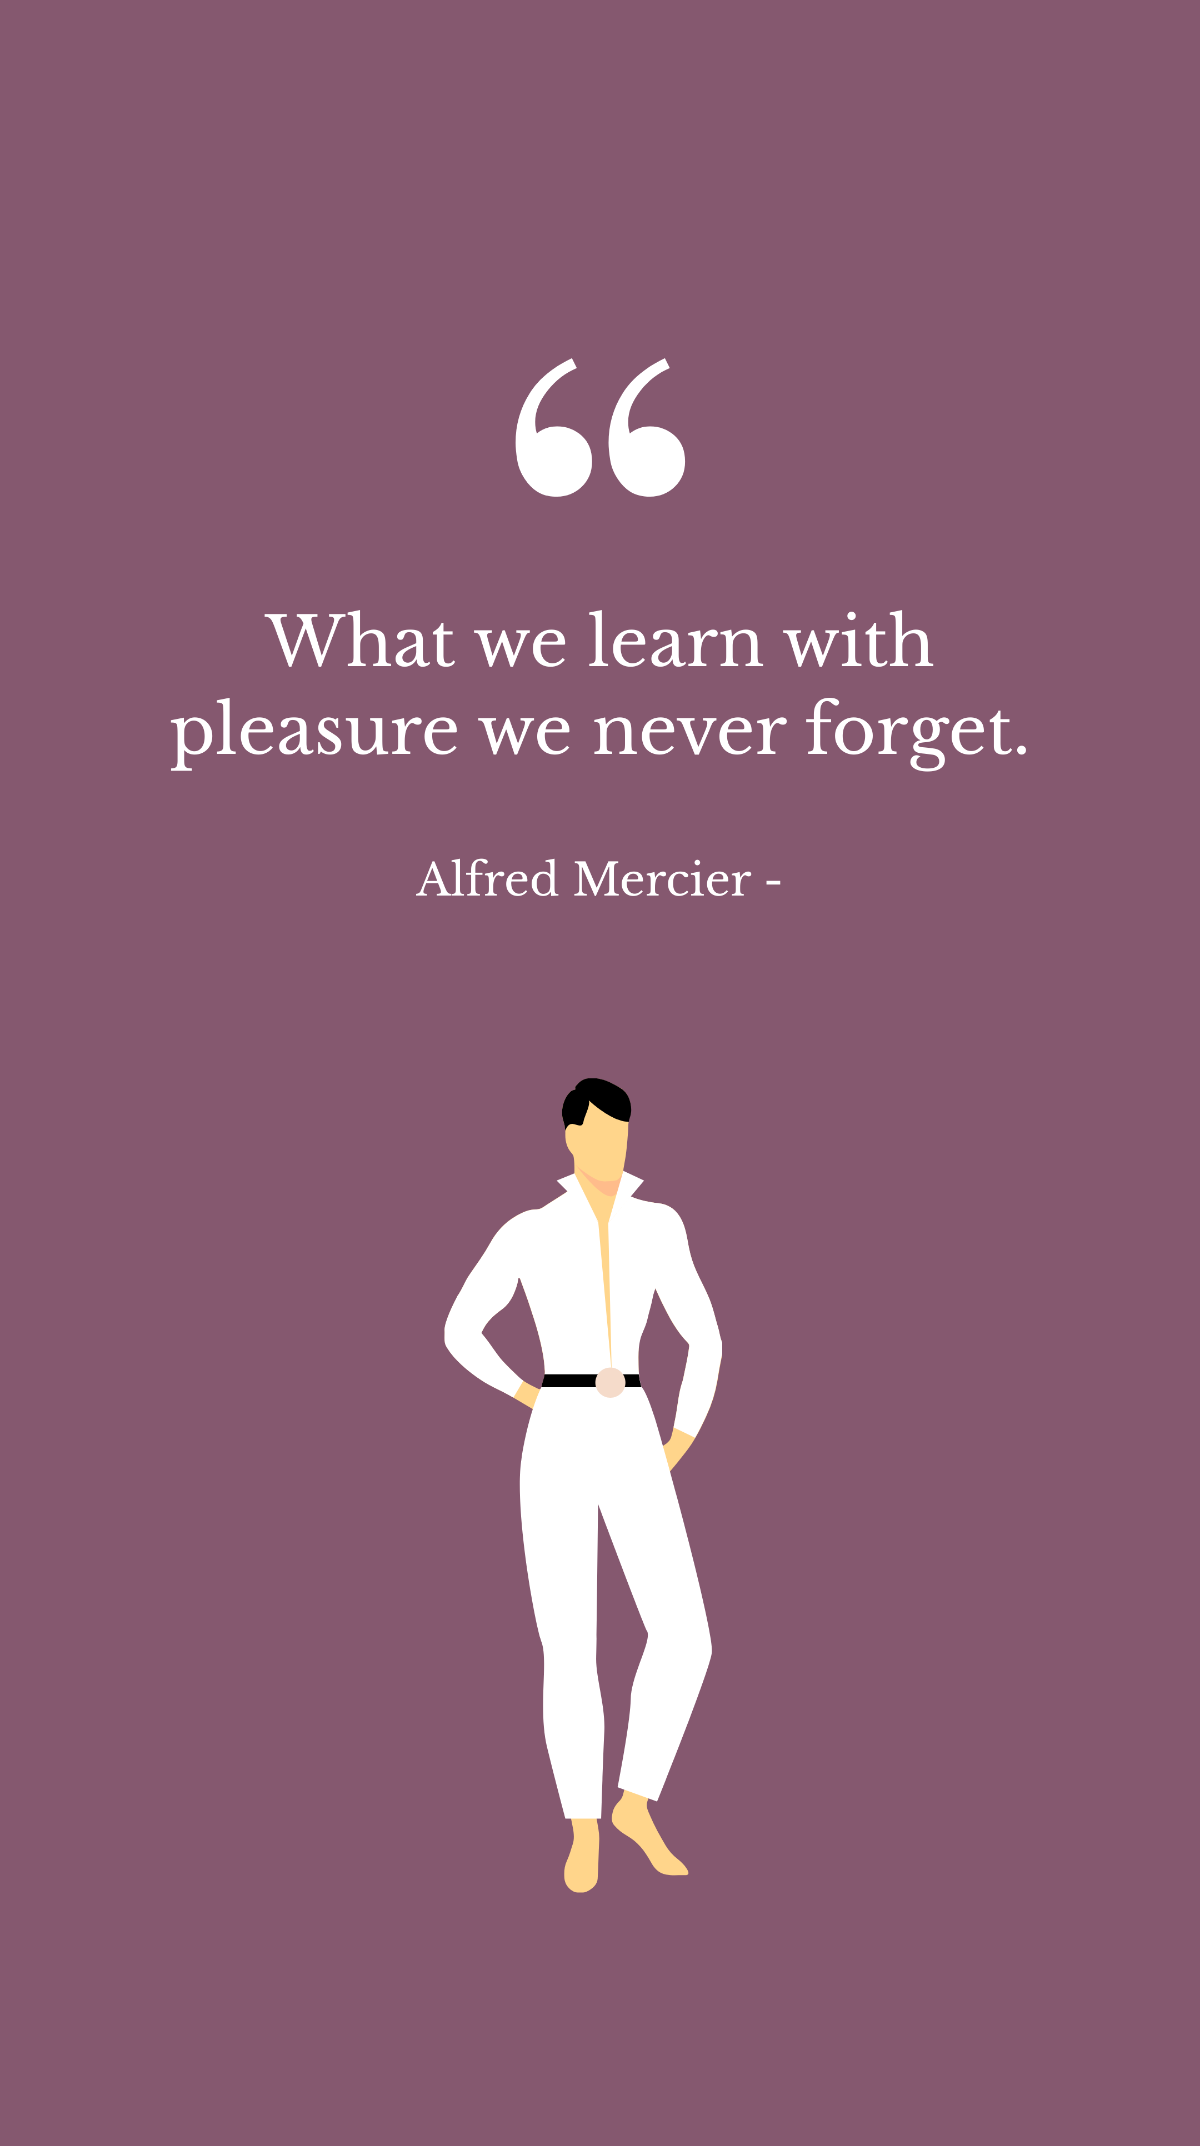 Alfred Mercier - What we learn with pleasure we never forget. Template